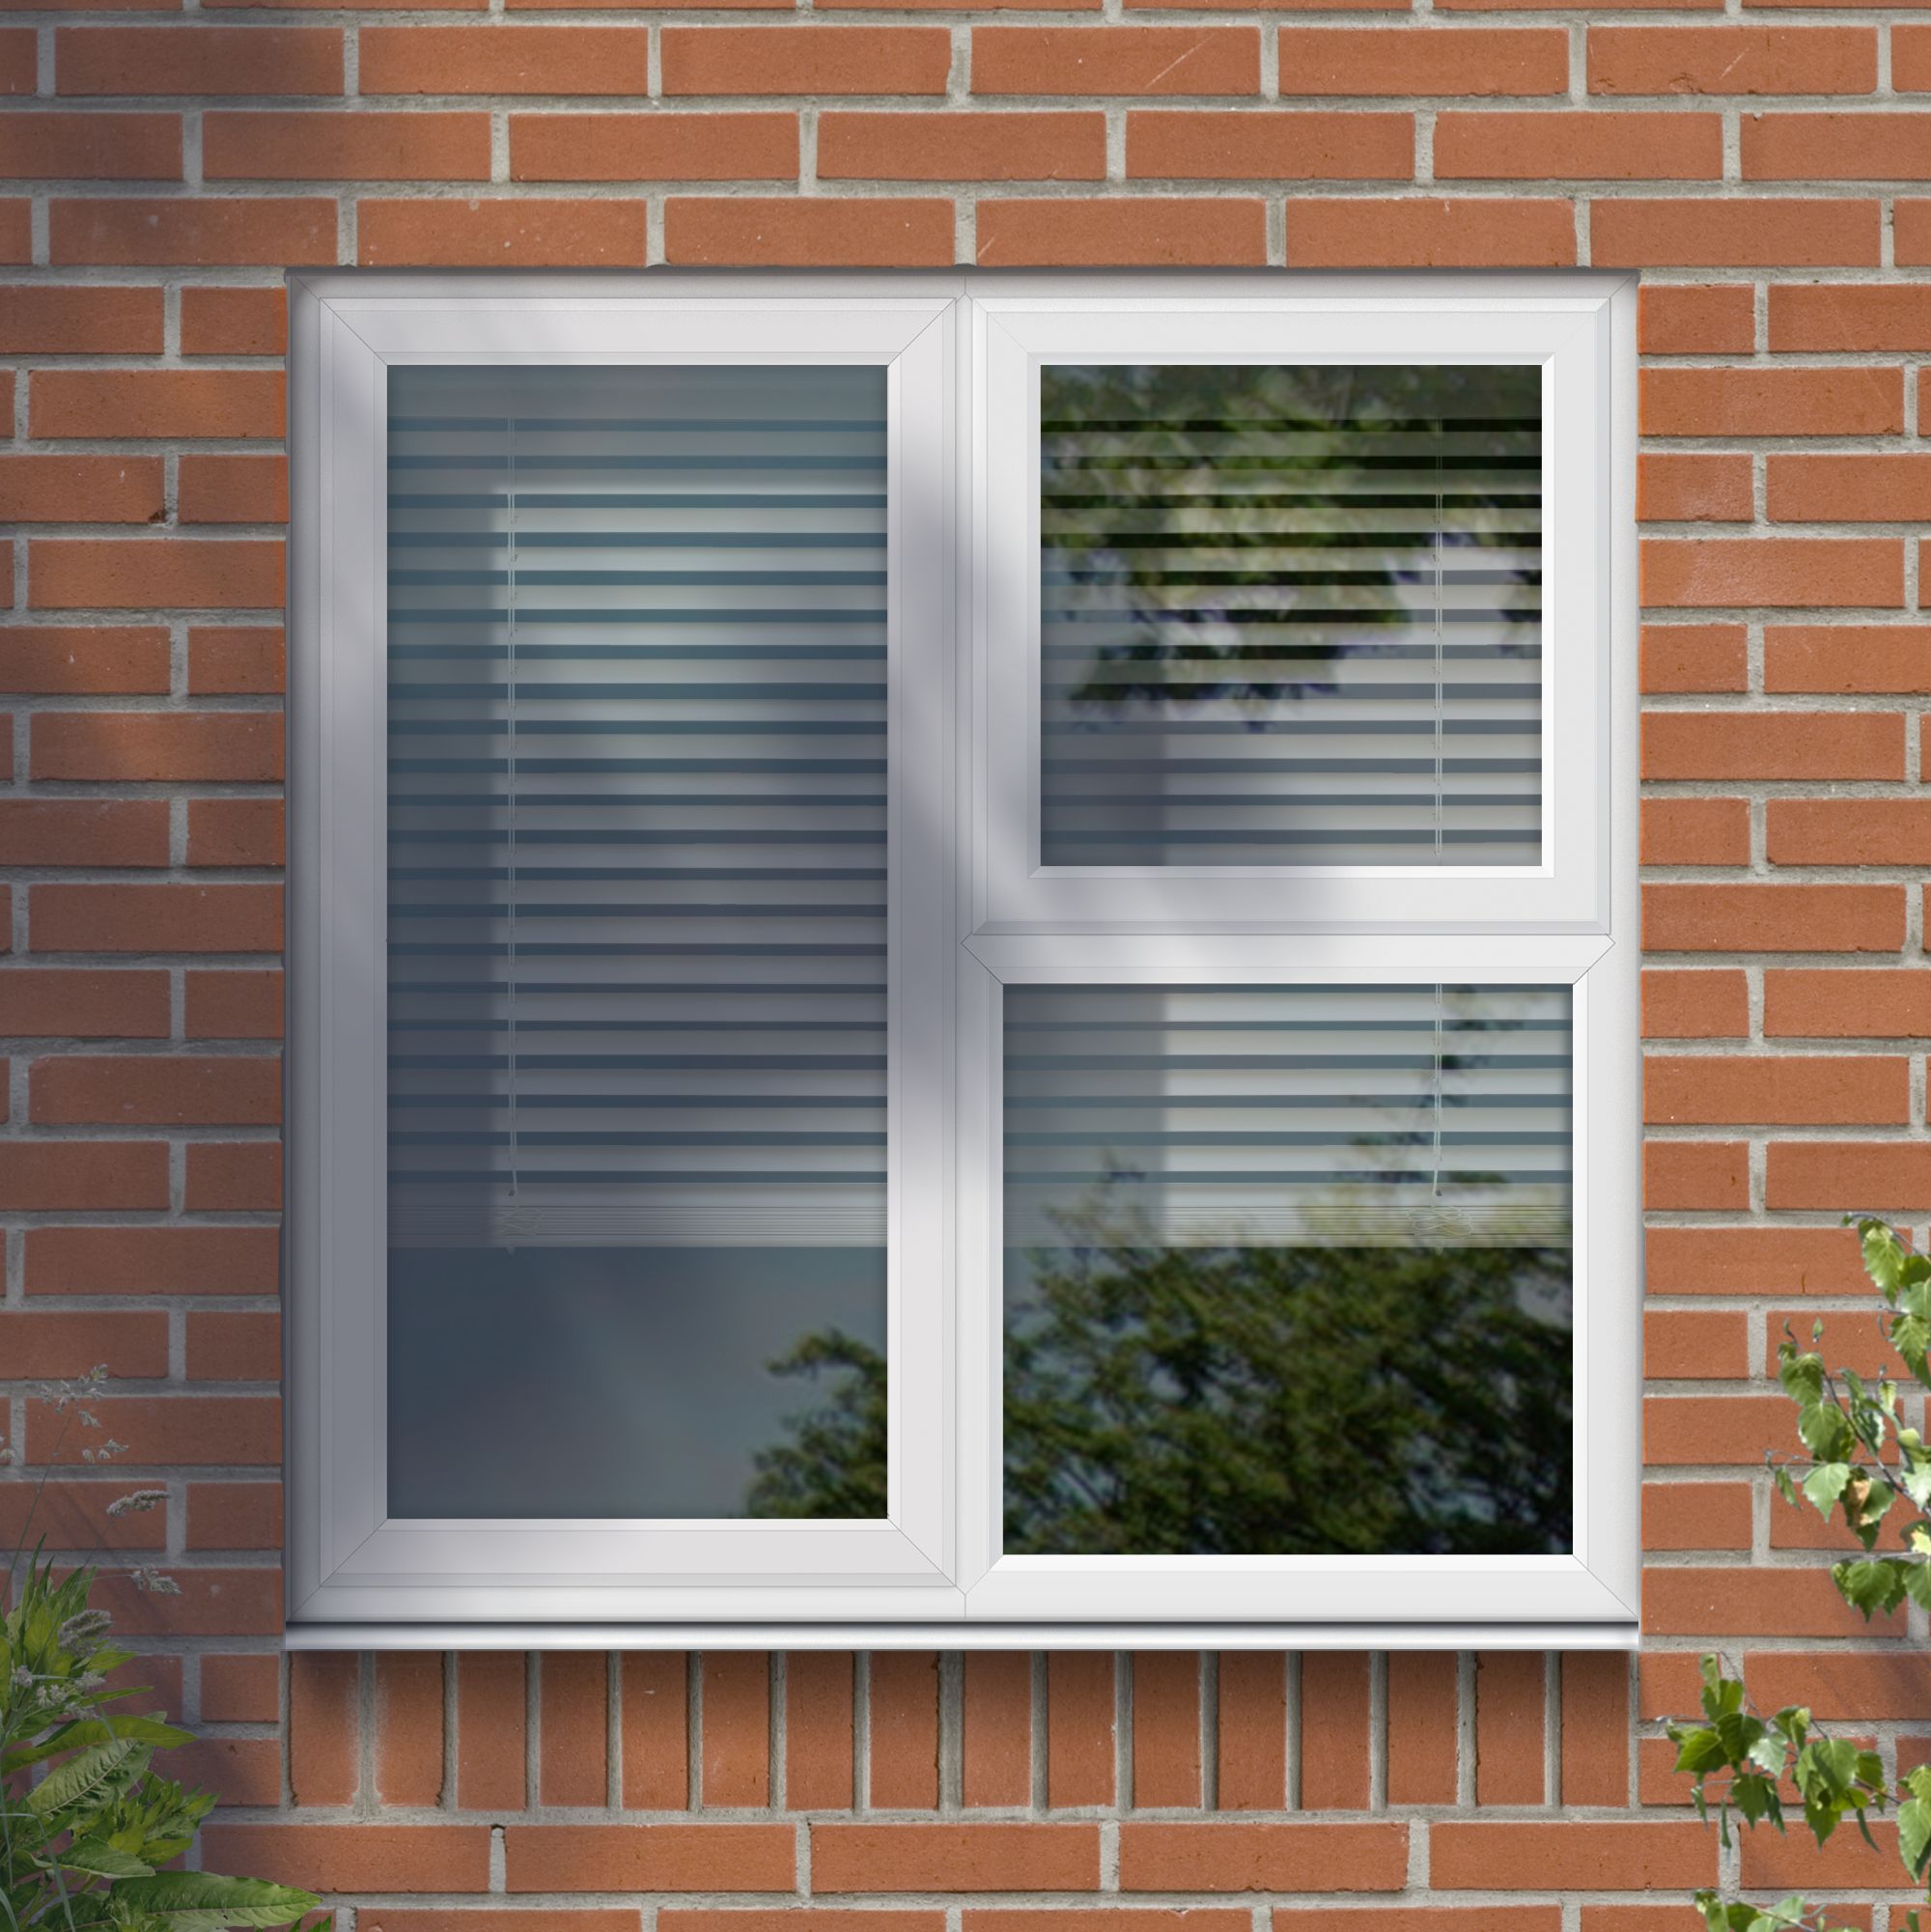 Fortia 3P Clear Glazed White uPVC Left-handed Side & top hung Window, (H)965mm (W)905mm